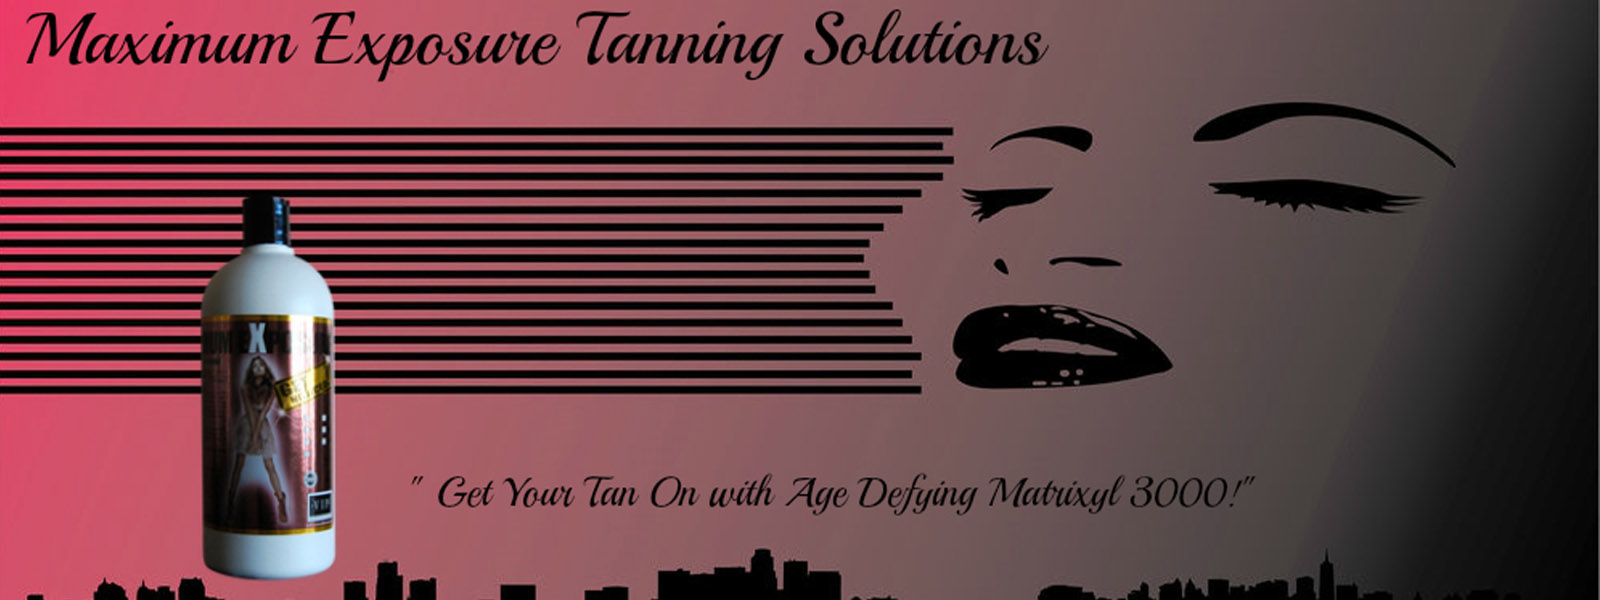 Best Tanning Solutions Most Natural Tanning Solutions Spray Tan